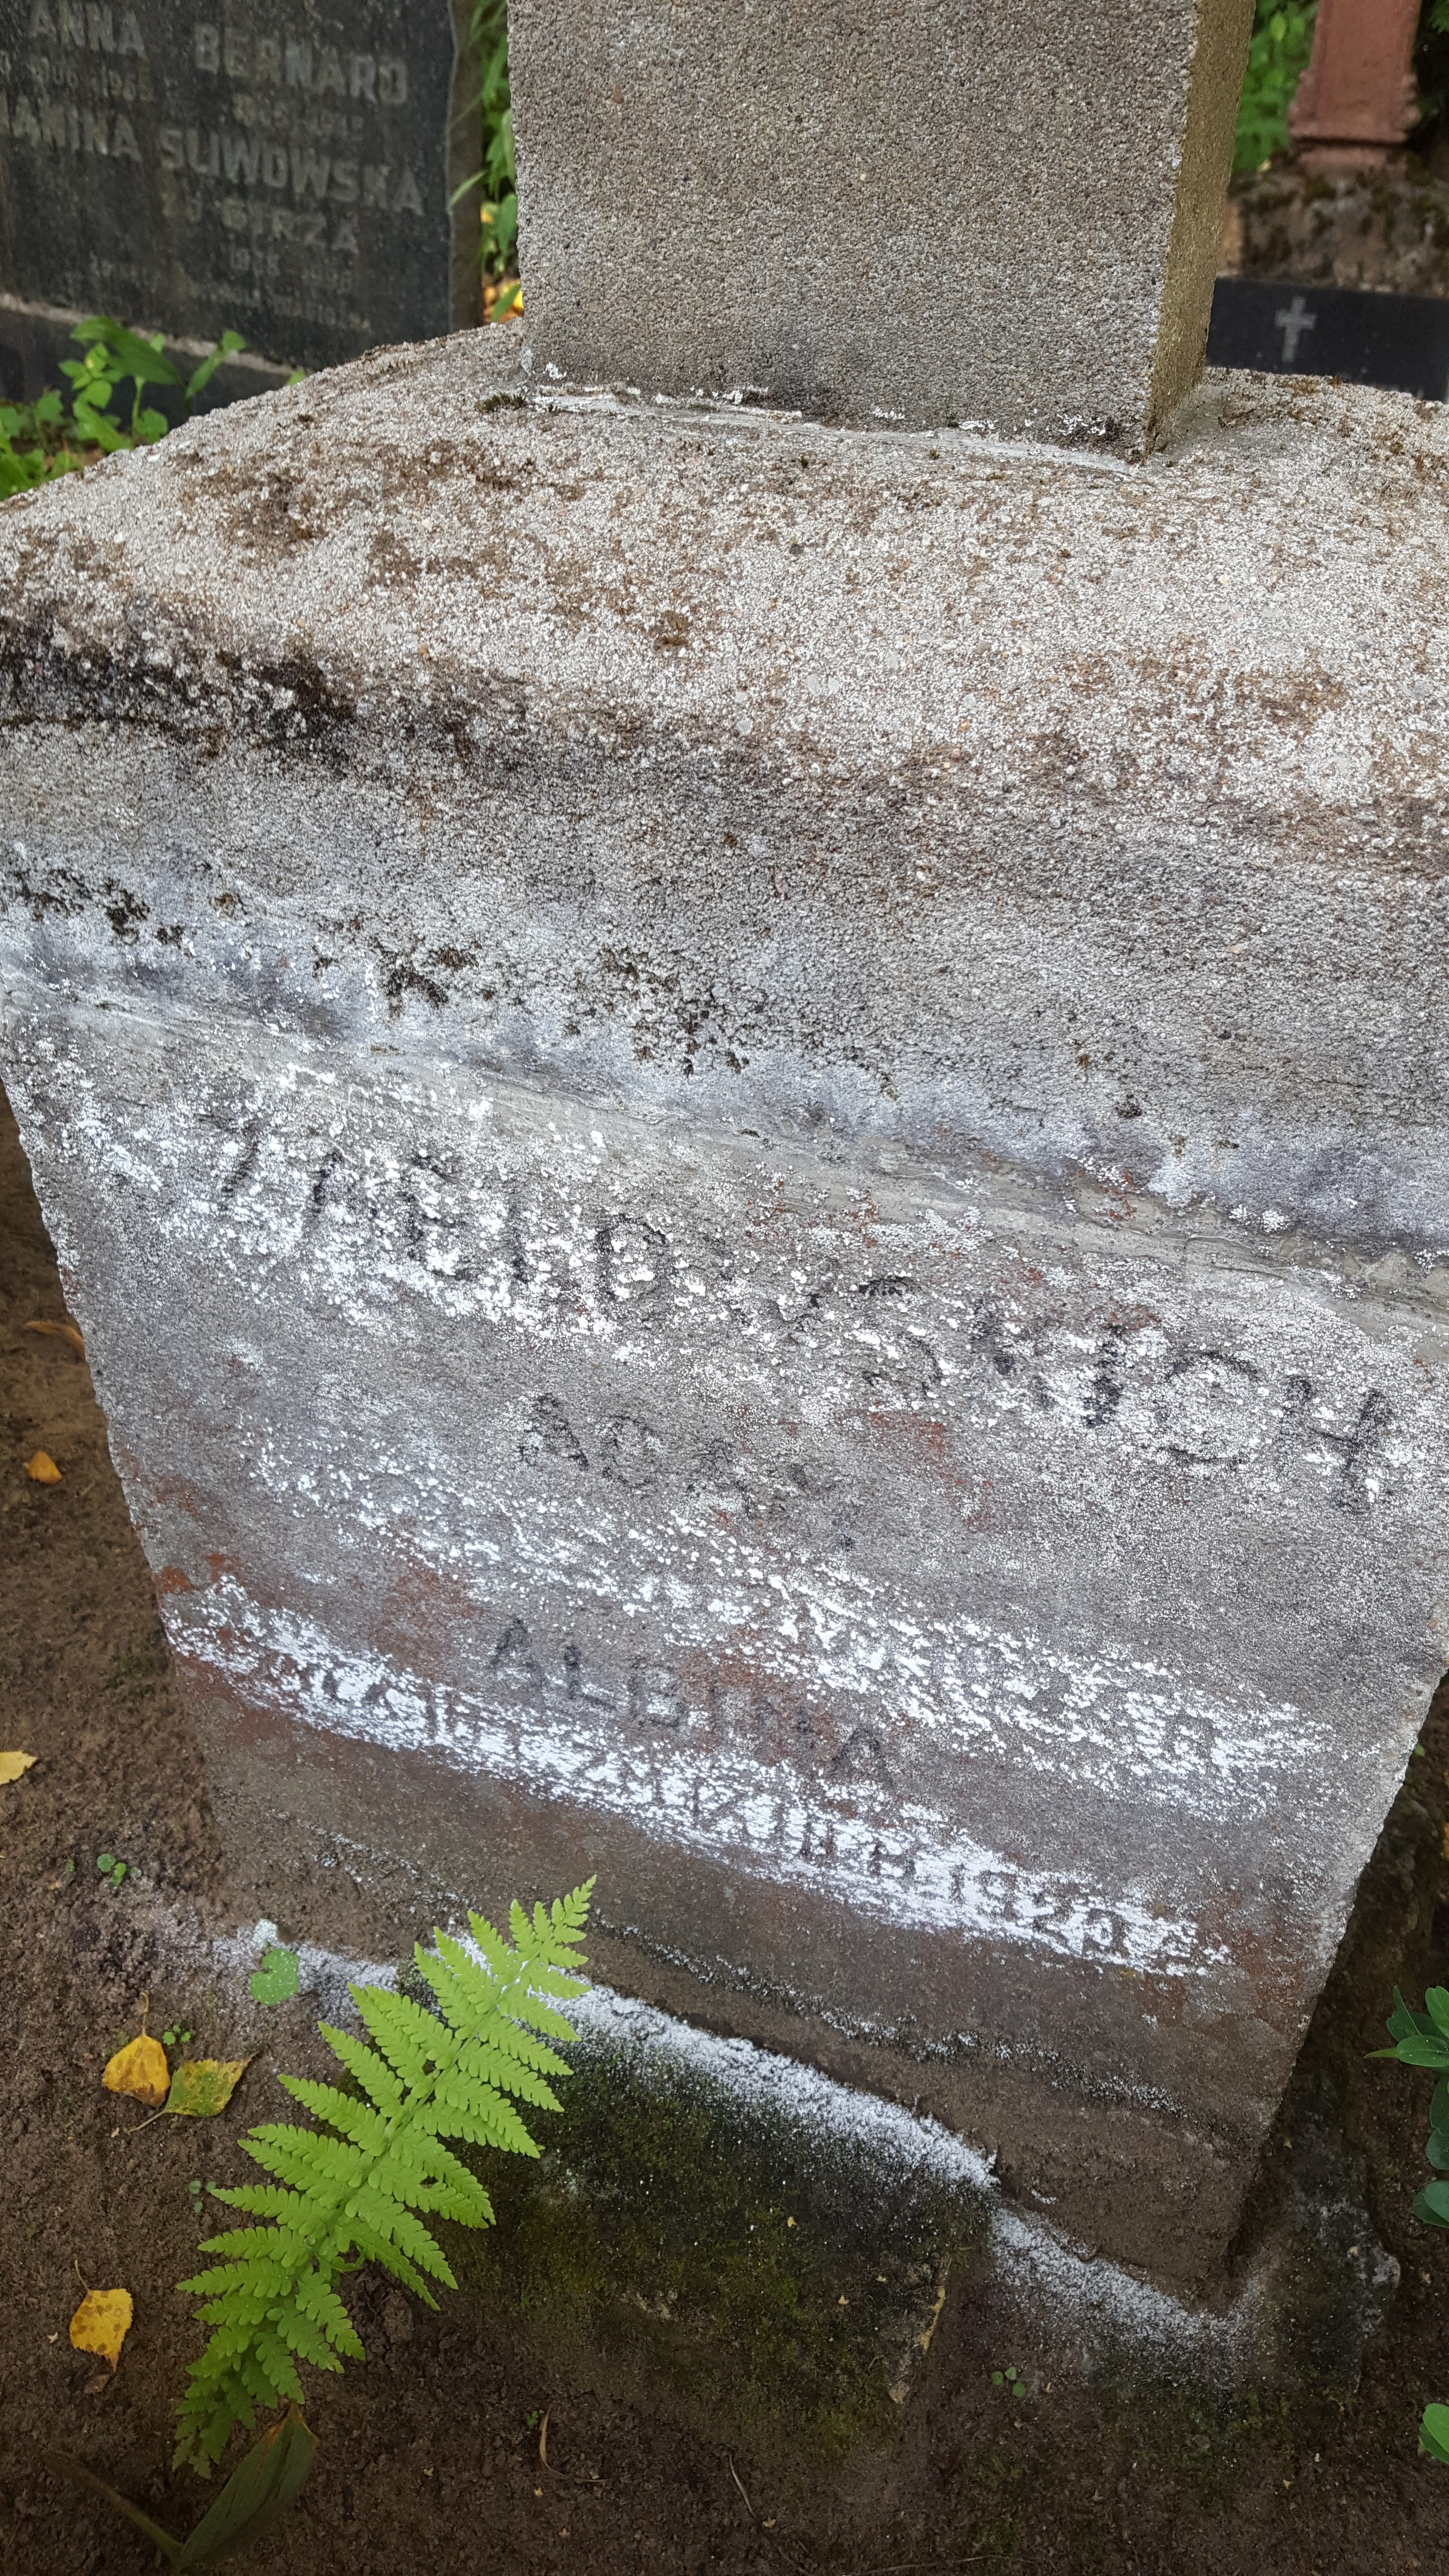 Inscription from the gravestone of Adam Szablowski and Albina Szablowska, St Michael's cemetery in Riga, as of 2021.